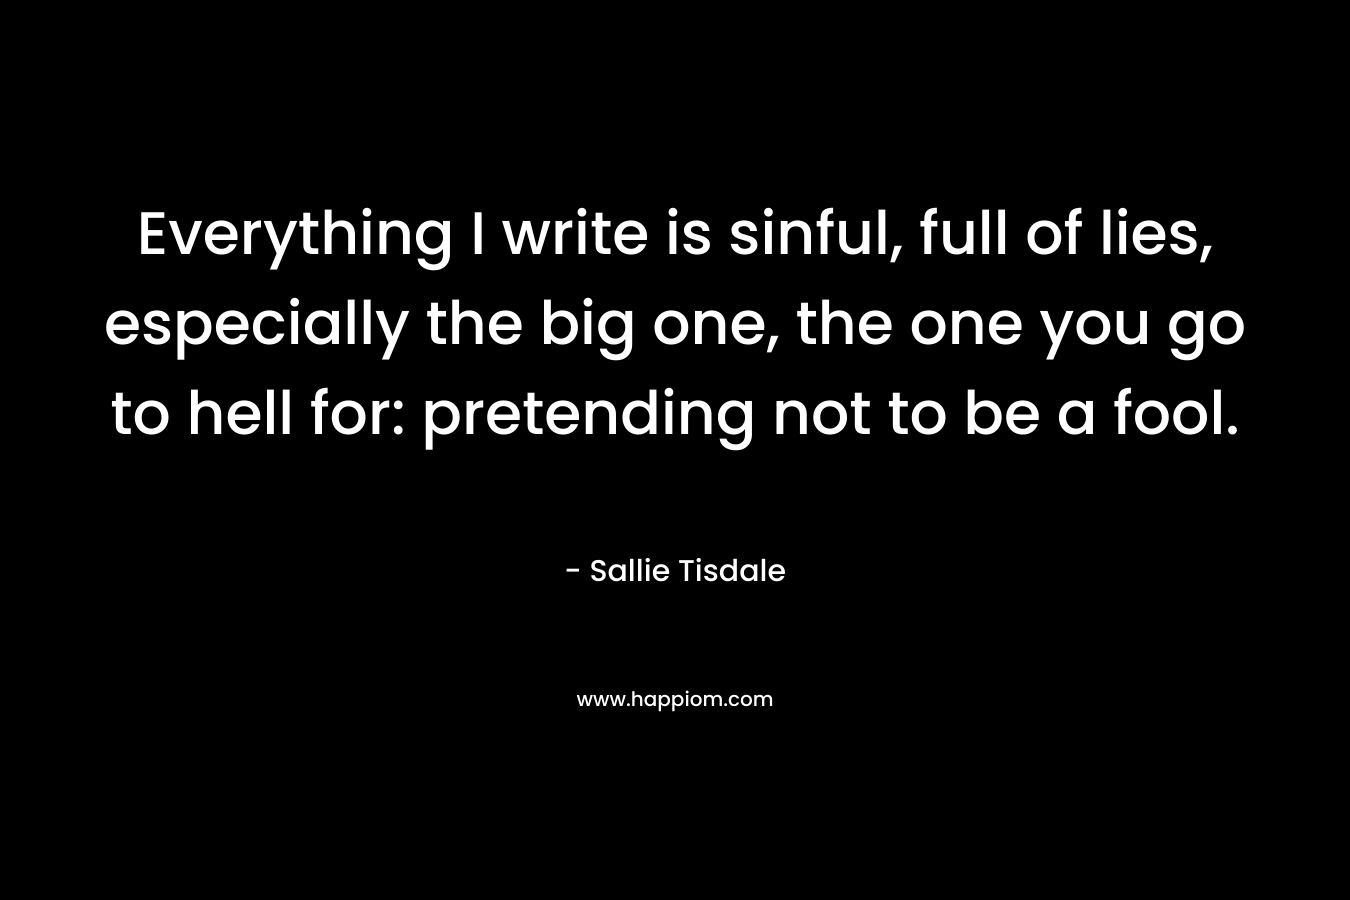 Everything I write is sinful, full of lies, especially the big one, the one you go to hell for: pretending not to be a fool. – Sallie Tisdale